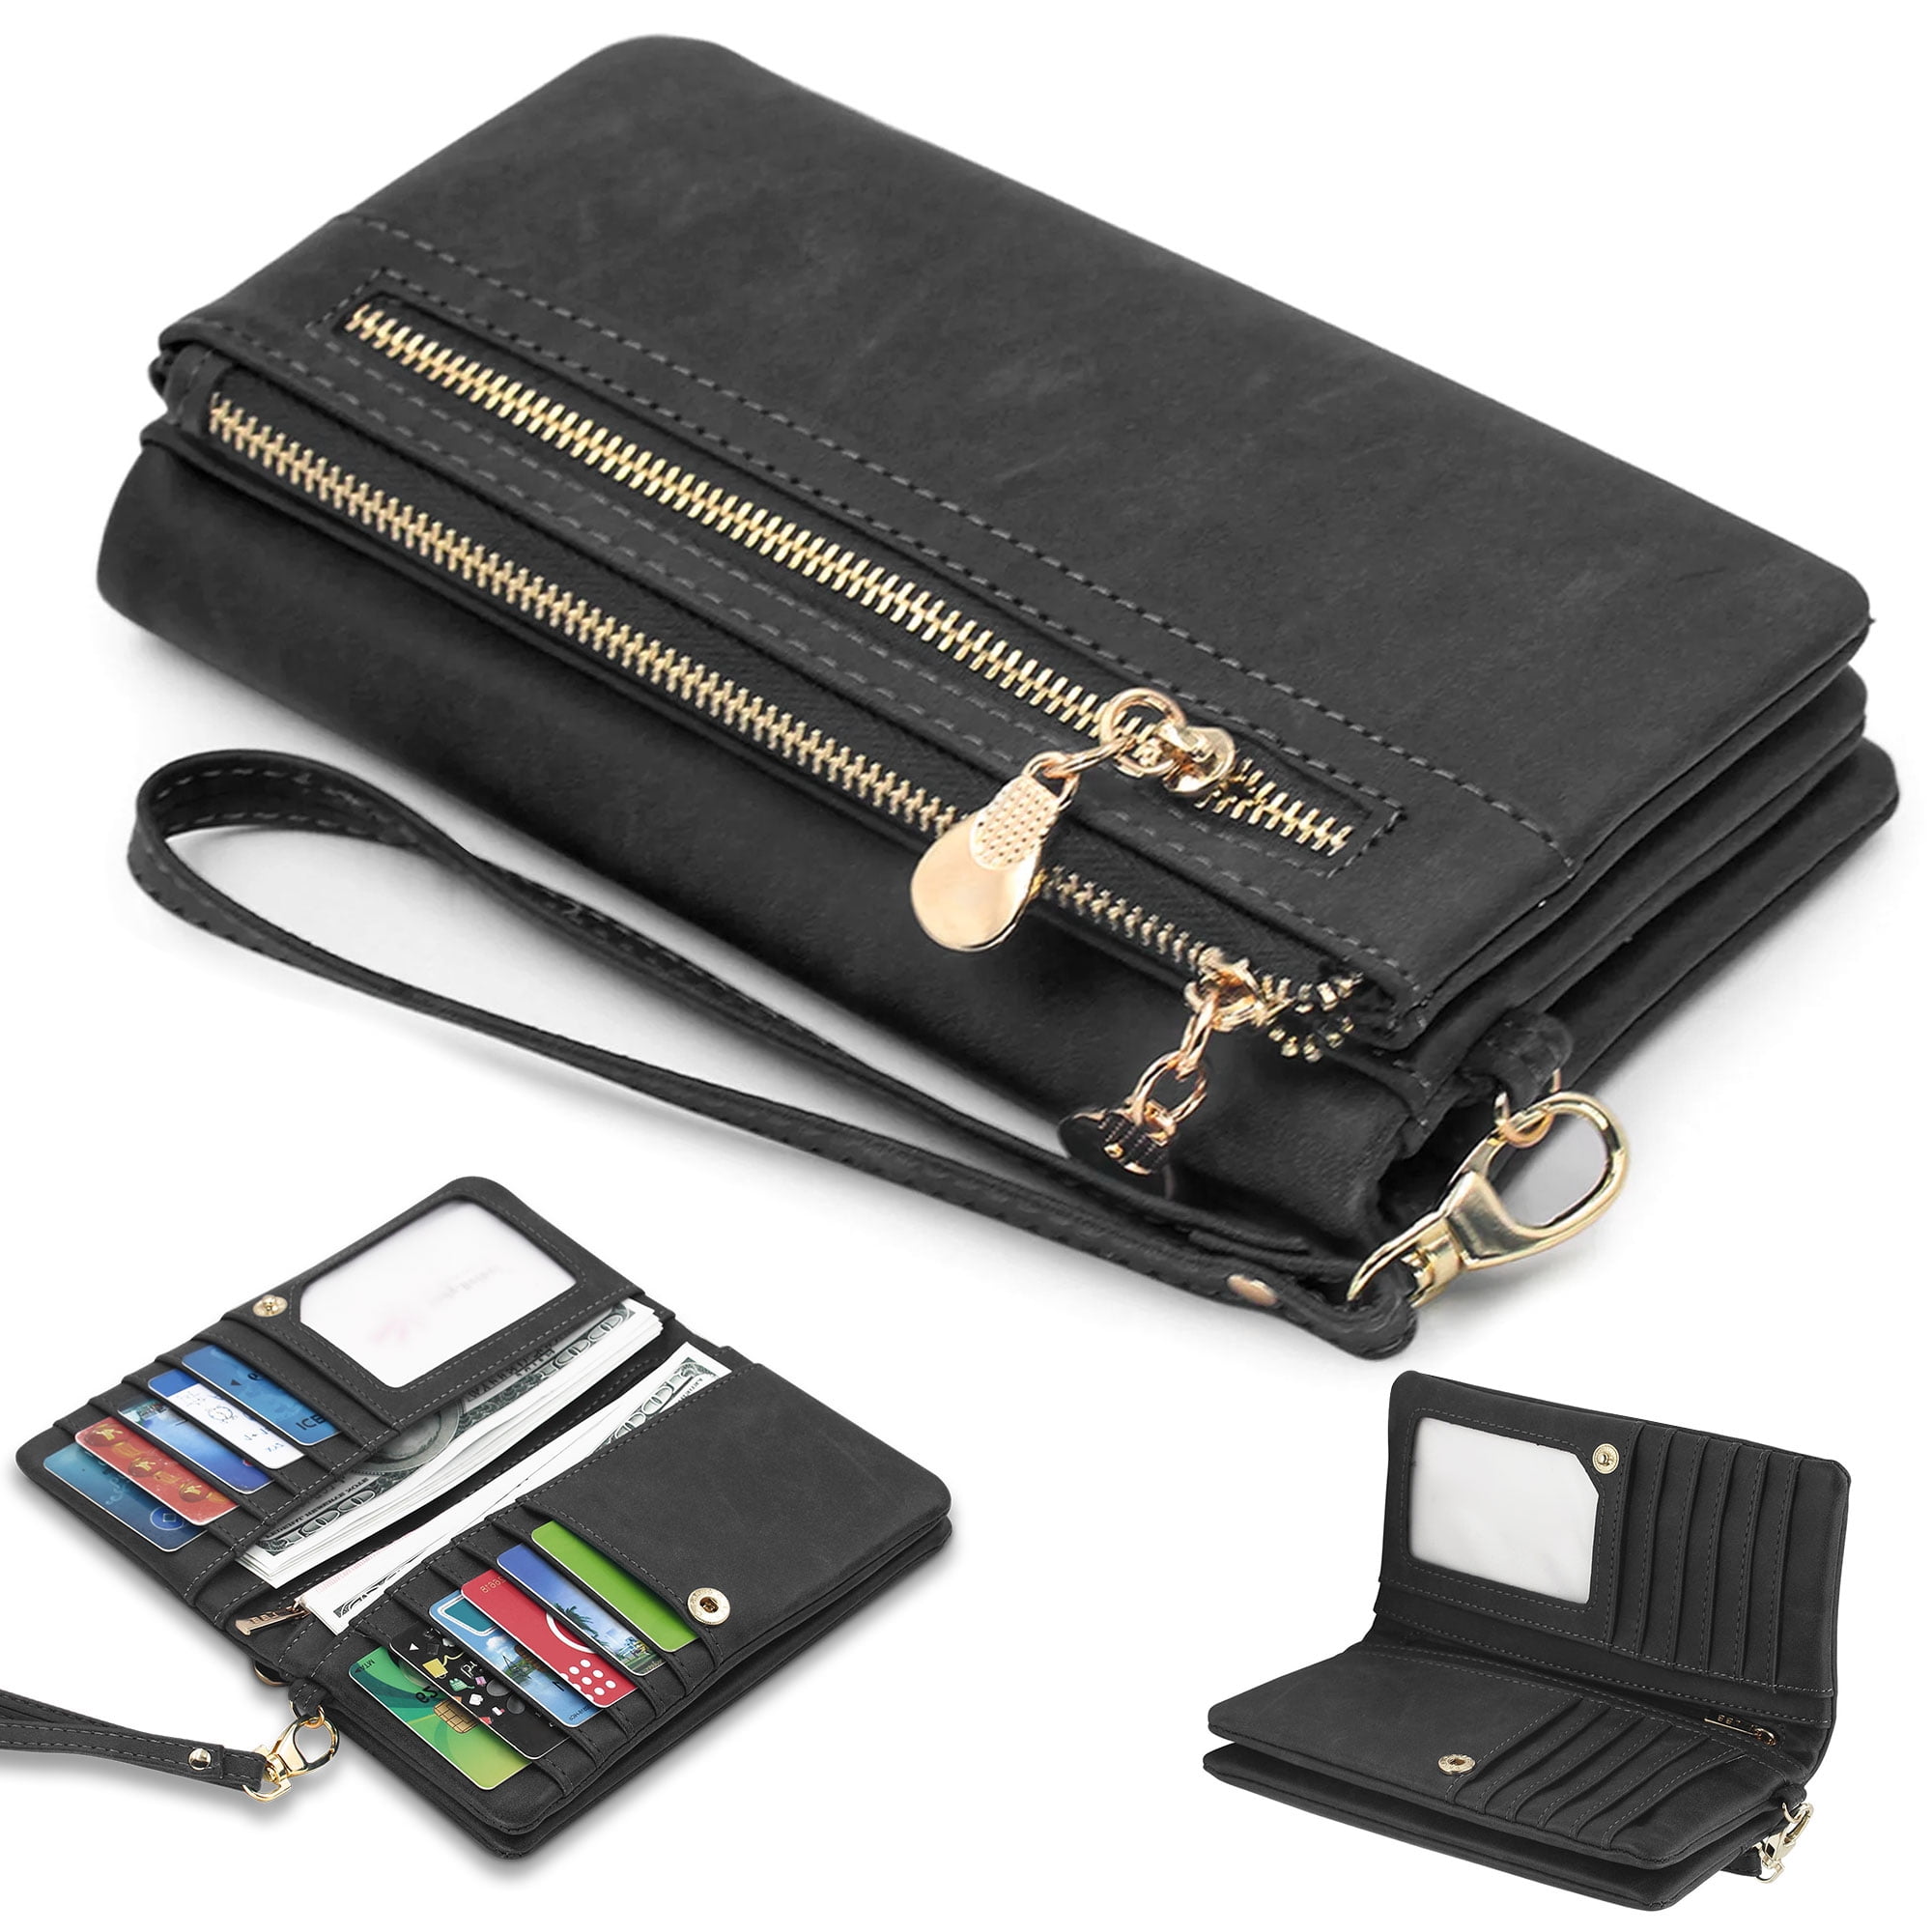 Women's Long Wallet, Large Capacity PU Leather Credit Card Holder Purse  with Wrist Strap, Zipper Closure Elegant Clutch Wallet Handbag Gifts for  Women